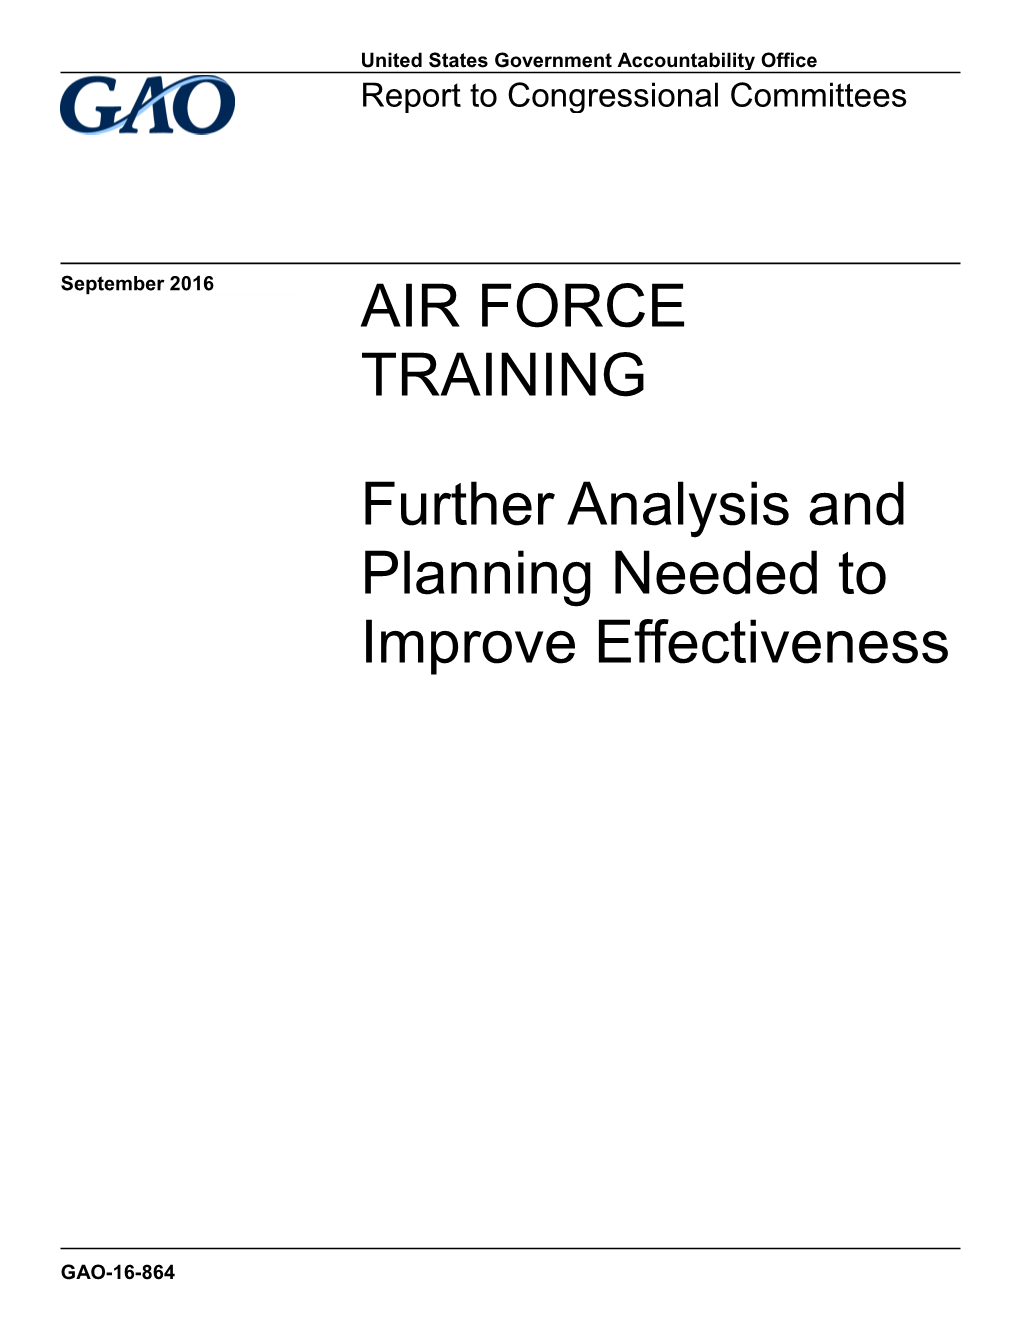 Air Force Training: Further Analysis and Planning Needed to Improve Effectiveness, GAO-16-635SU (Washington, D.C.: Aug